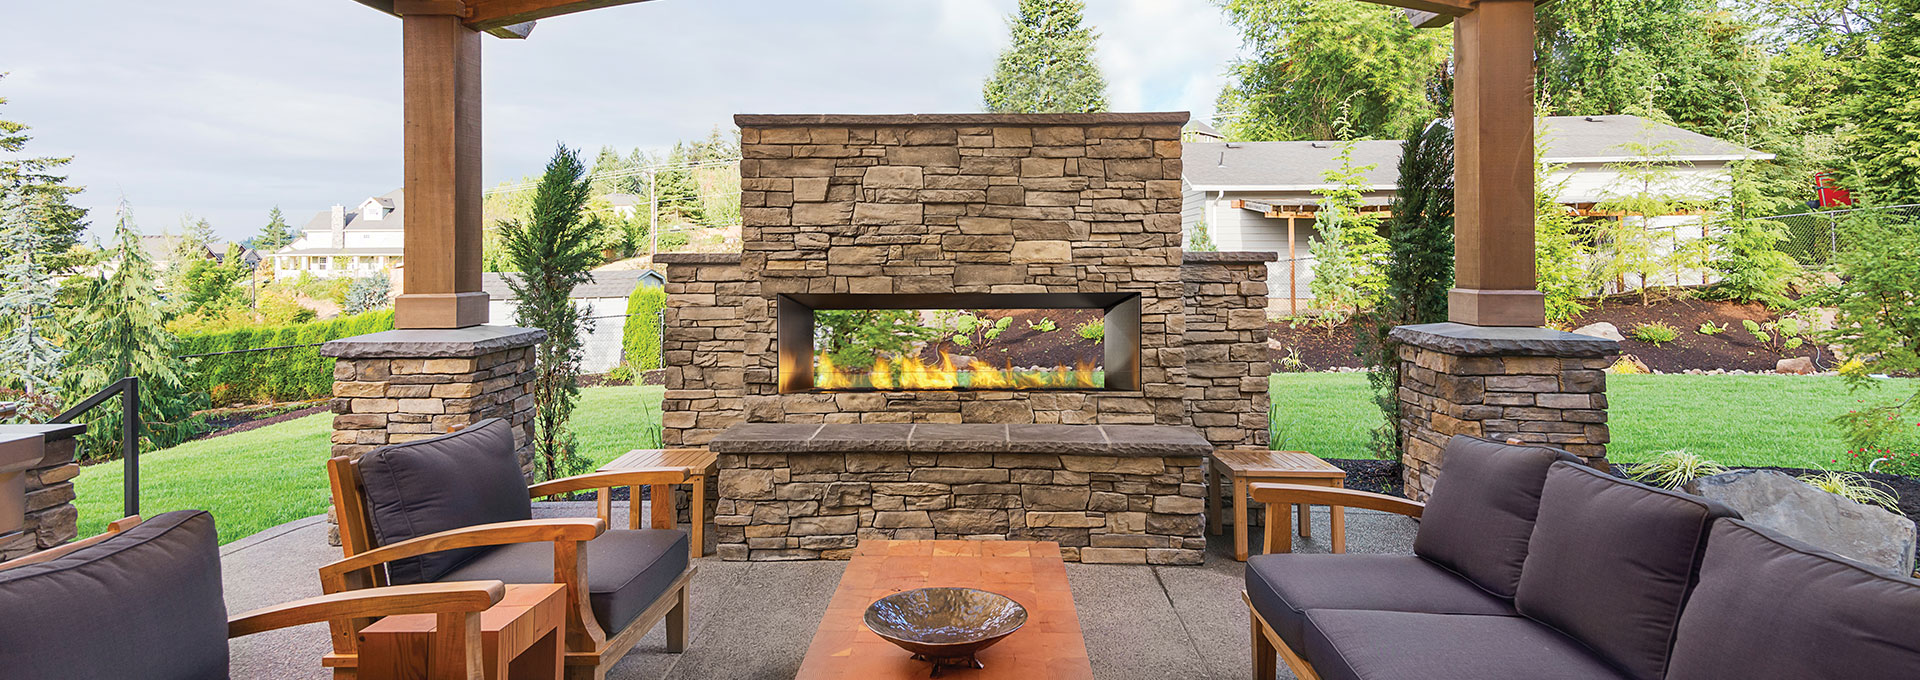 Outdoor Gas Fireplaces Fireplace Kits, Best Outdoor Linear Gas Fireplace